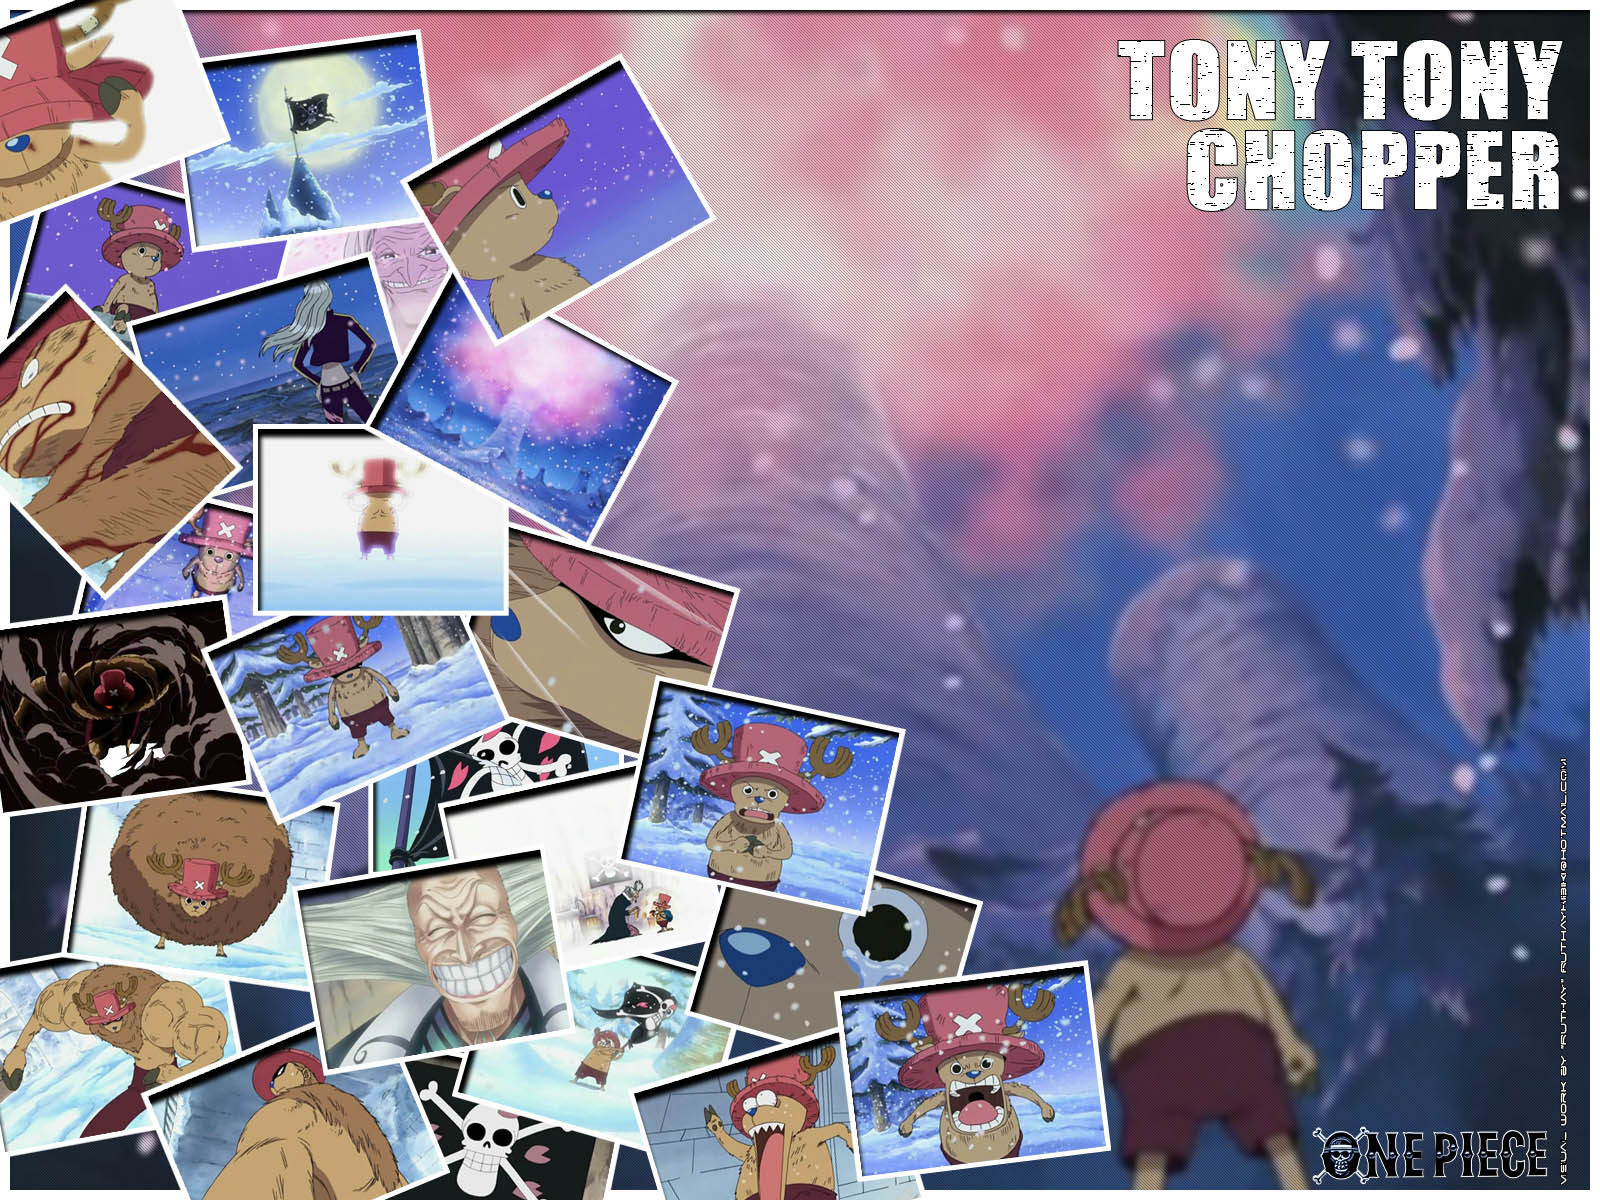 One Piece: Chopper - Images Gallery